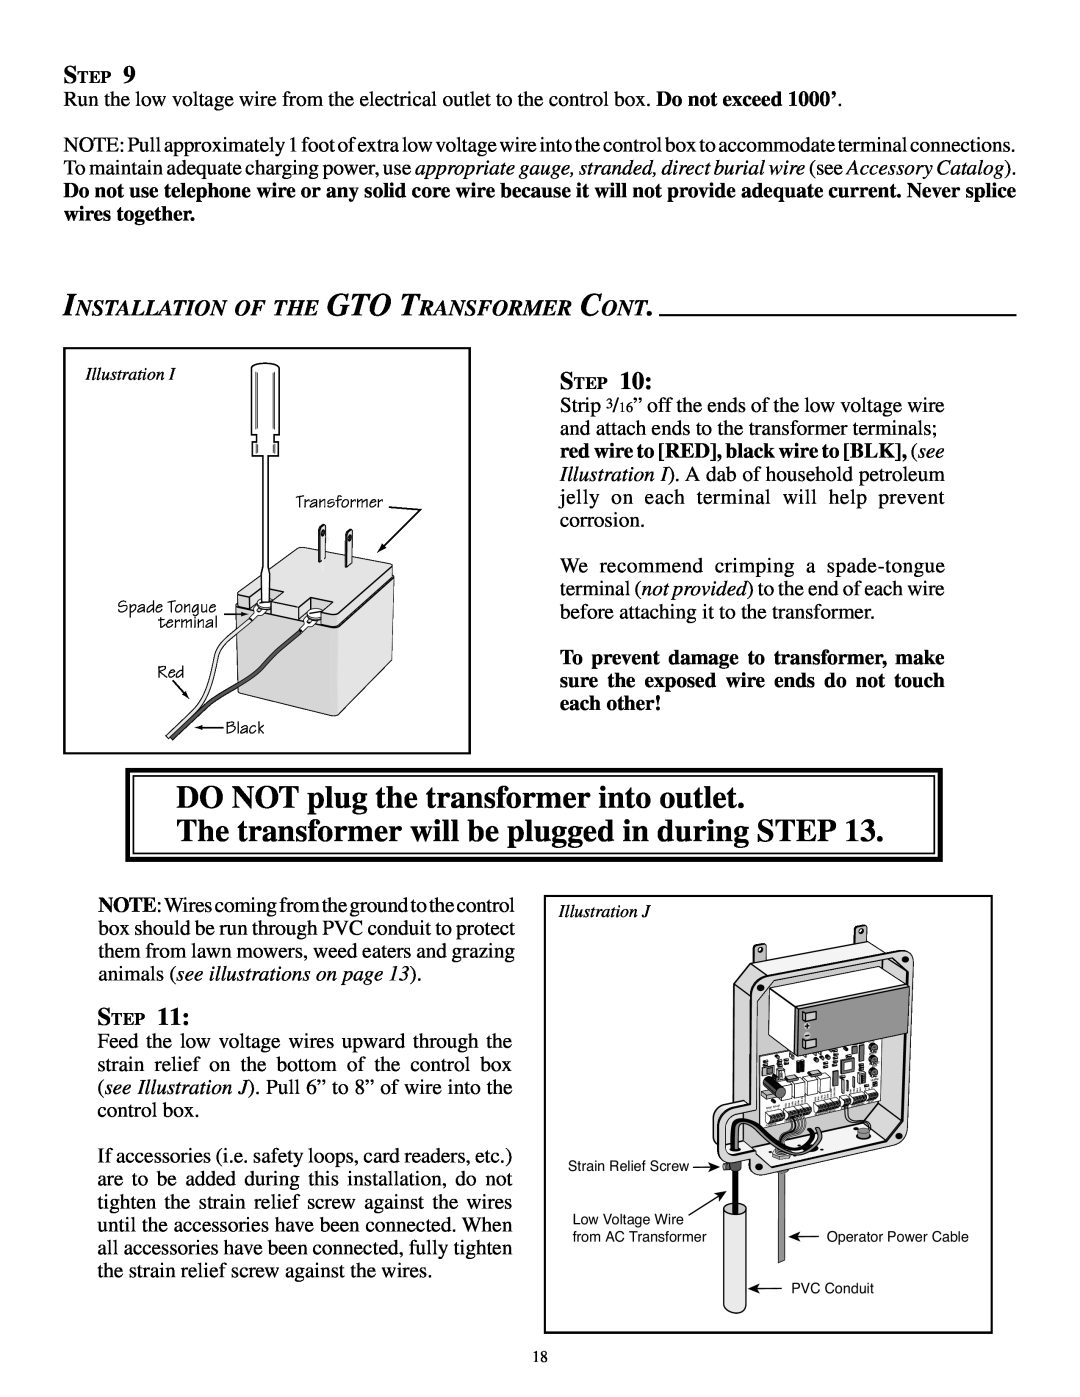 GTO SL-1000B, SL-2000B DO NOT plug the transformer into outlet, The transformer will be plugged in during STEP, Step 